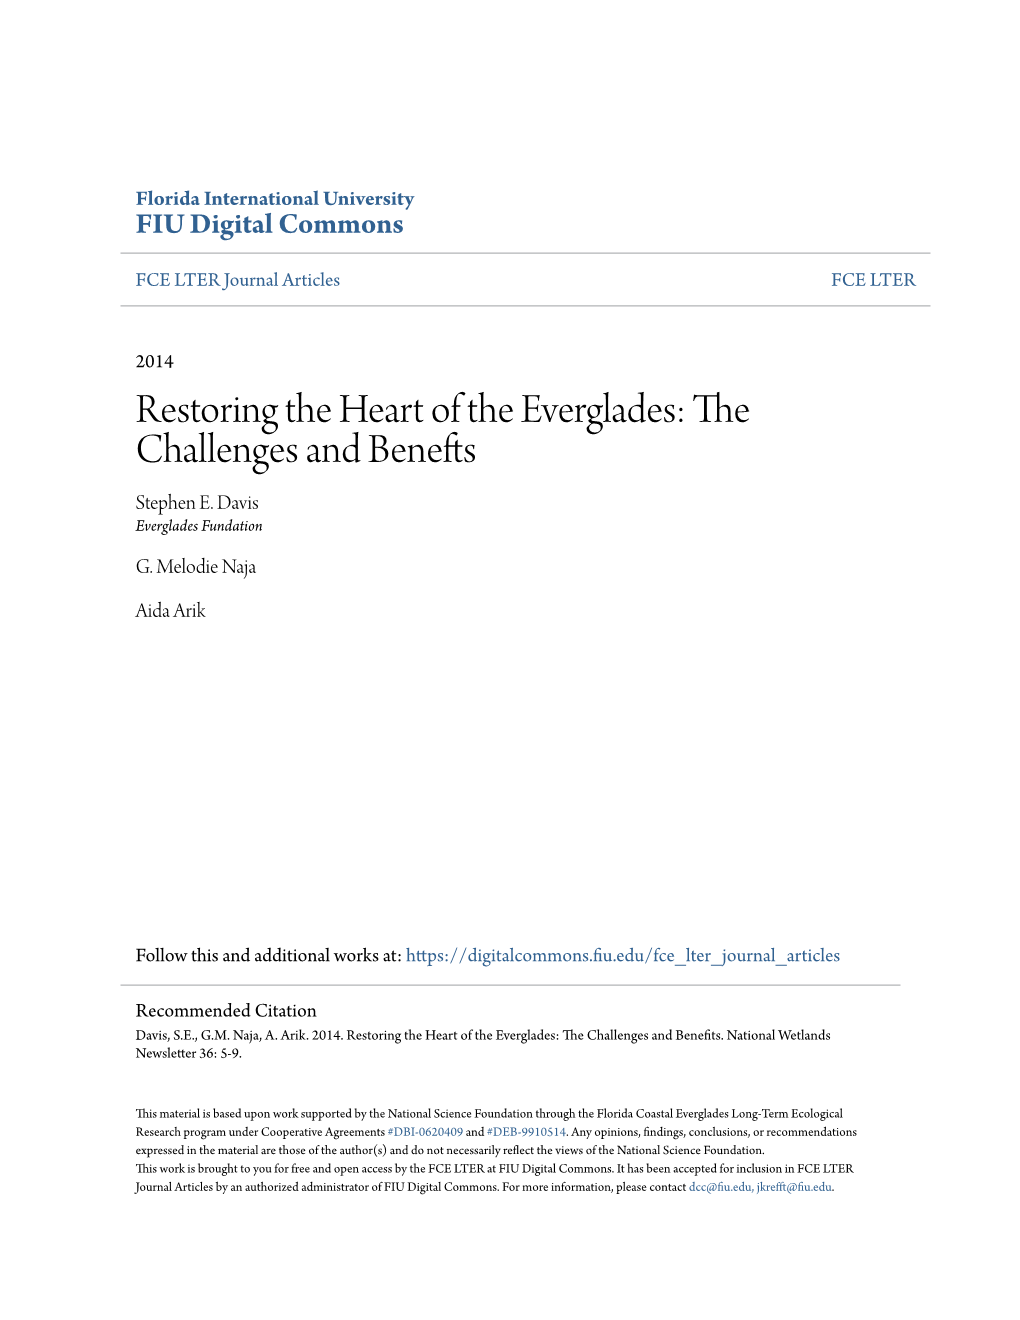 Restoring the Heart of the Everglades: the Challenges and Benefts Stephen E